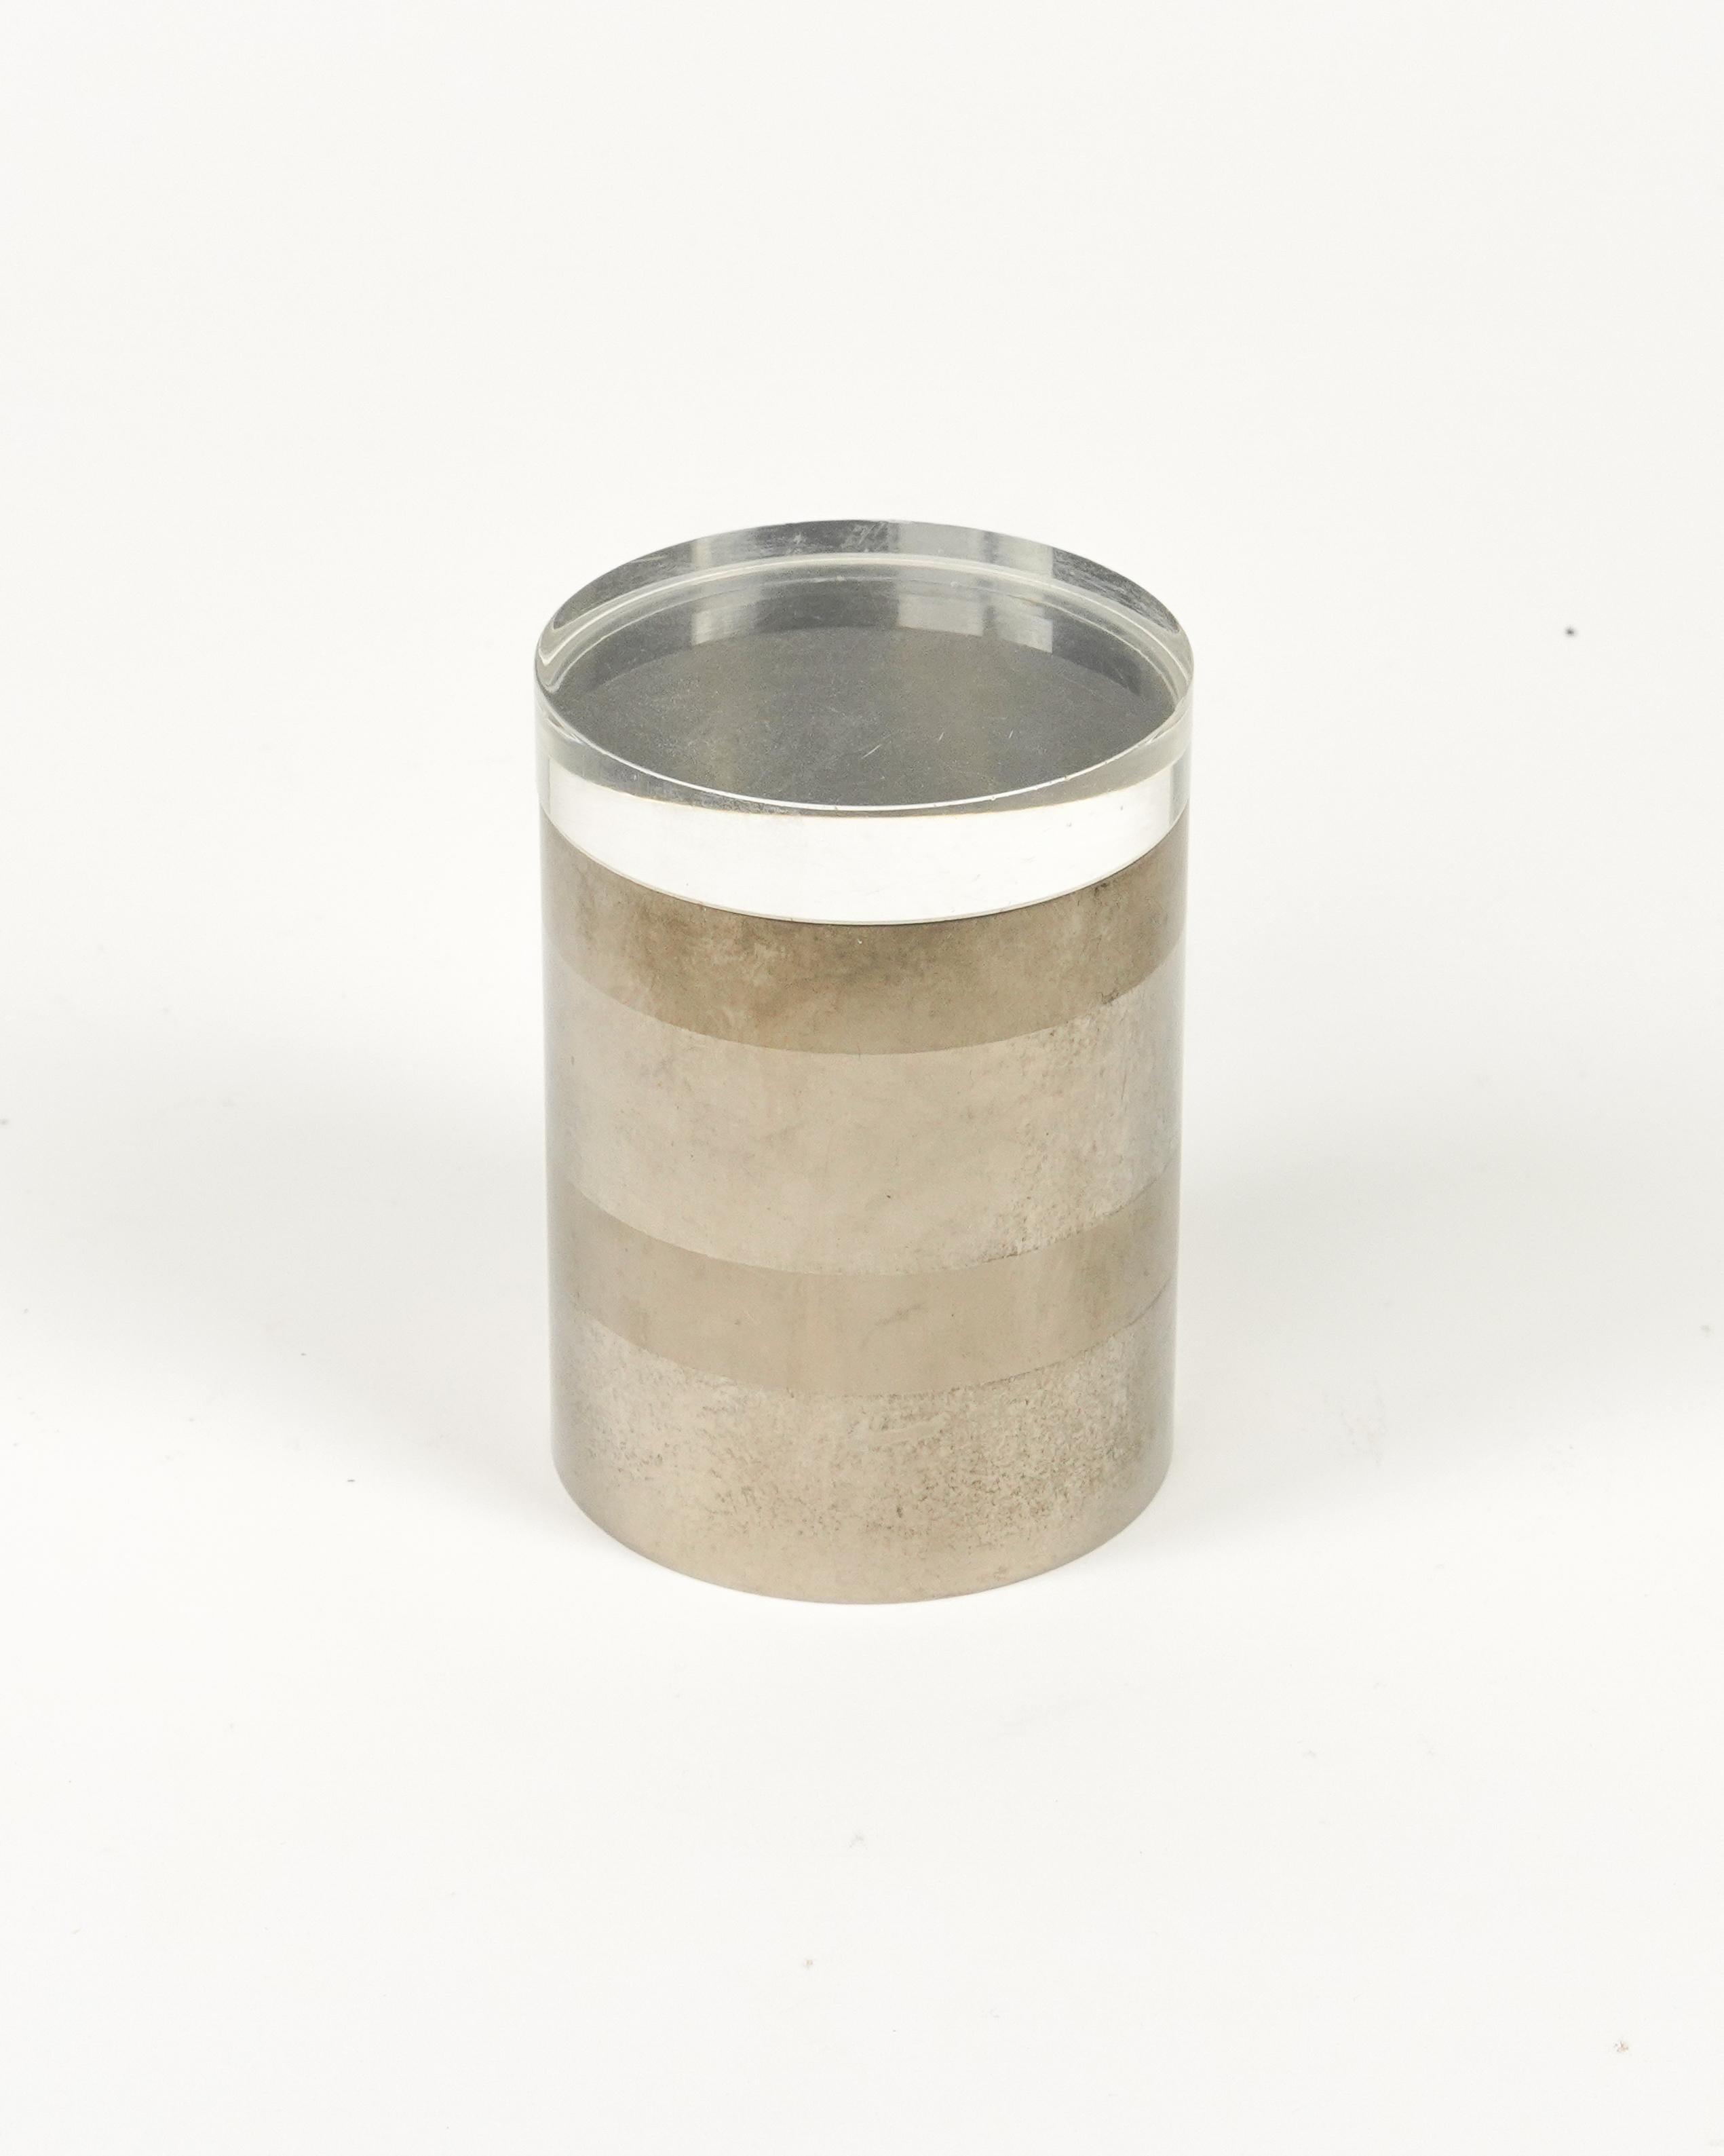 Midcentury amazing  cylindrical decorative box in chrome and lucite attributed to the Italian designer Romeo Rega.  

Made in Italy in the 1970s.  

Beautiful desk accessory or pieces for a coffee table or console. 